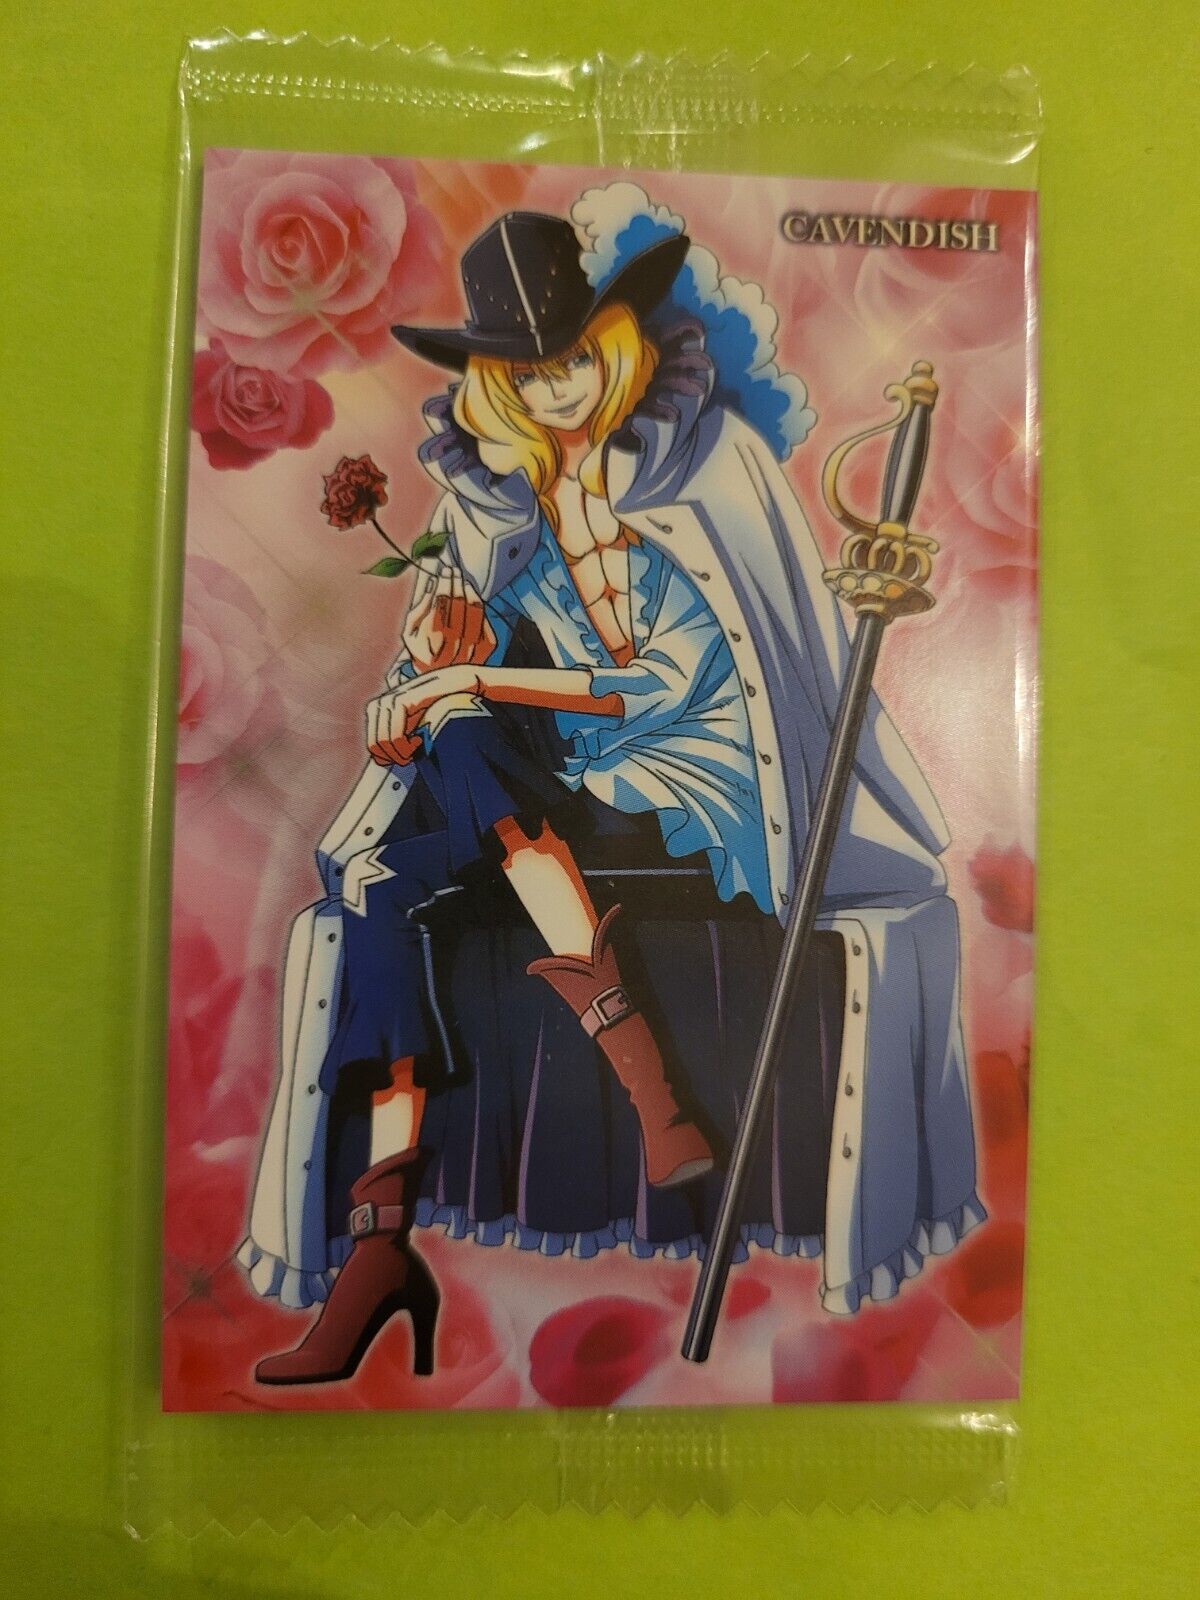 Cavendish One Piece Sealed Wafer Card No.20 Bandai Tcg Ccg Import Japan Cool 